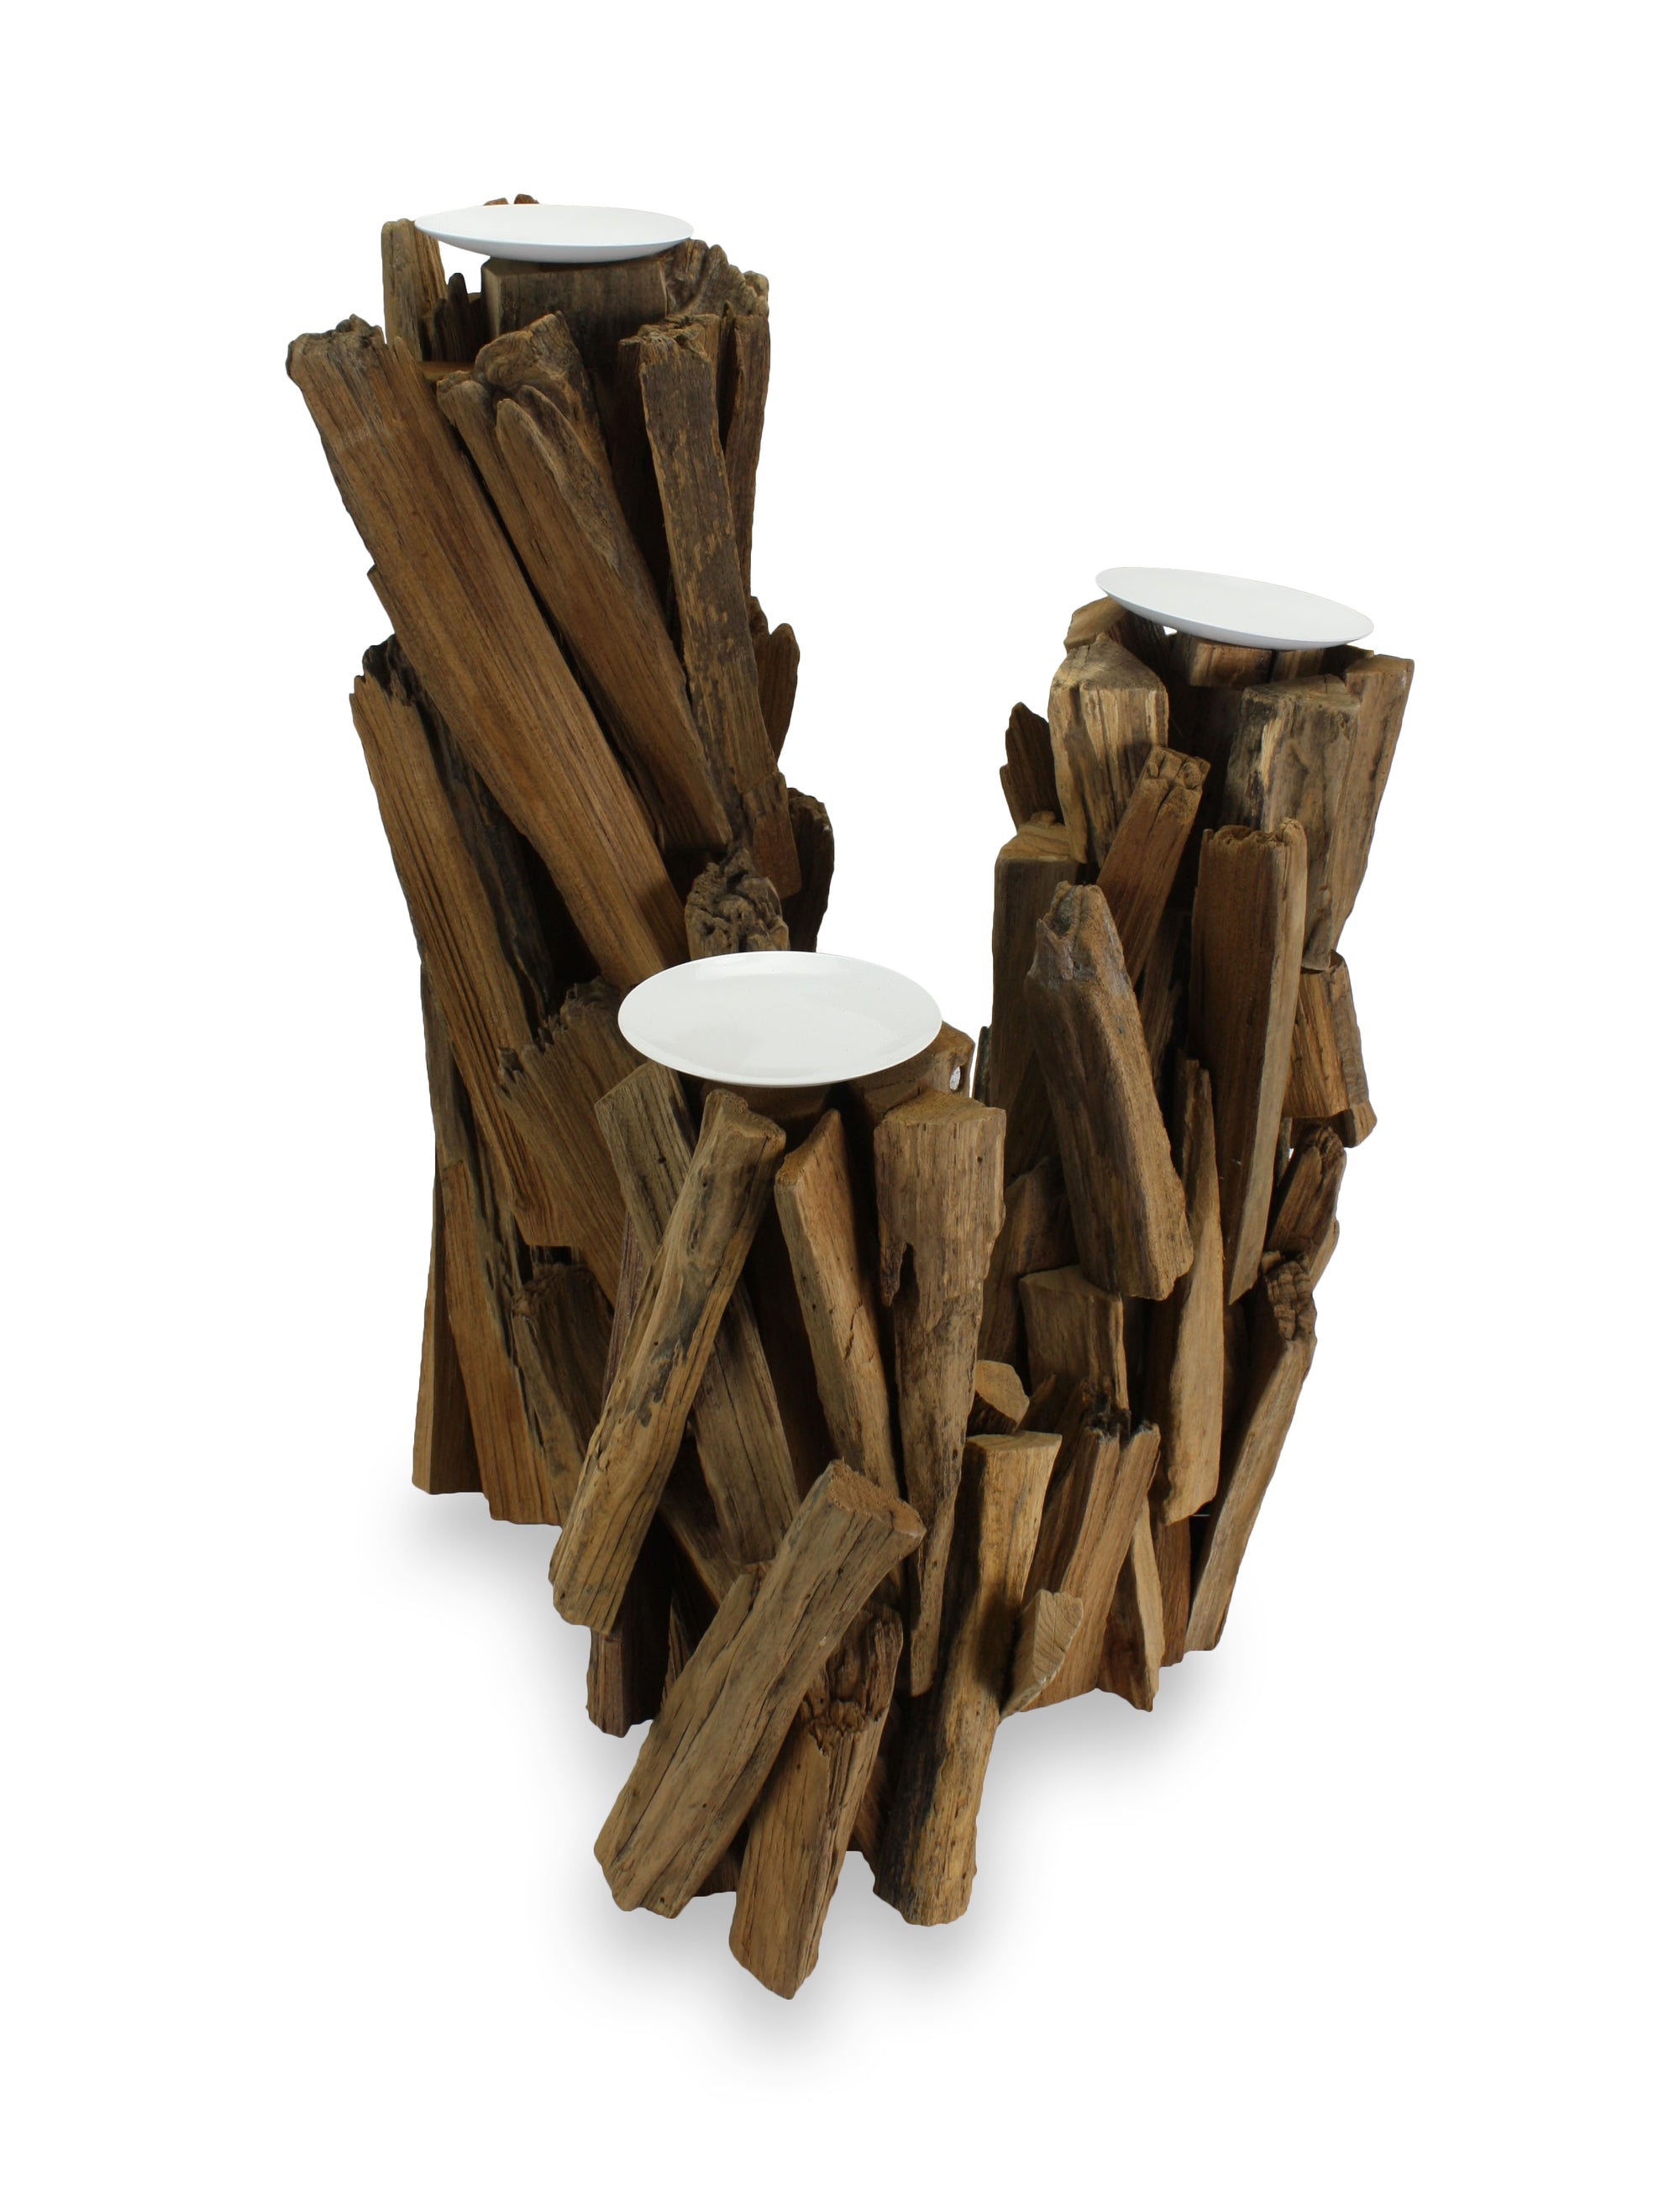 Large driftwood candle holders: 3 sizes available. - farangshop-co